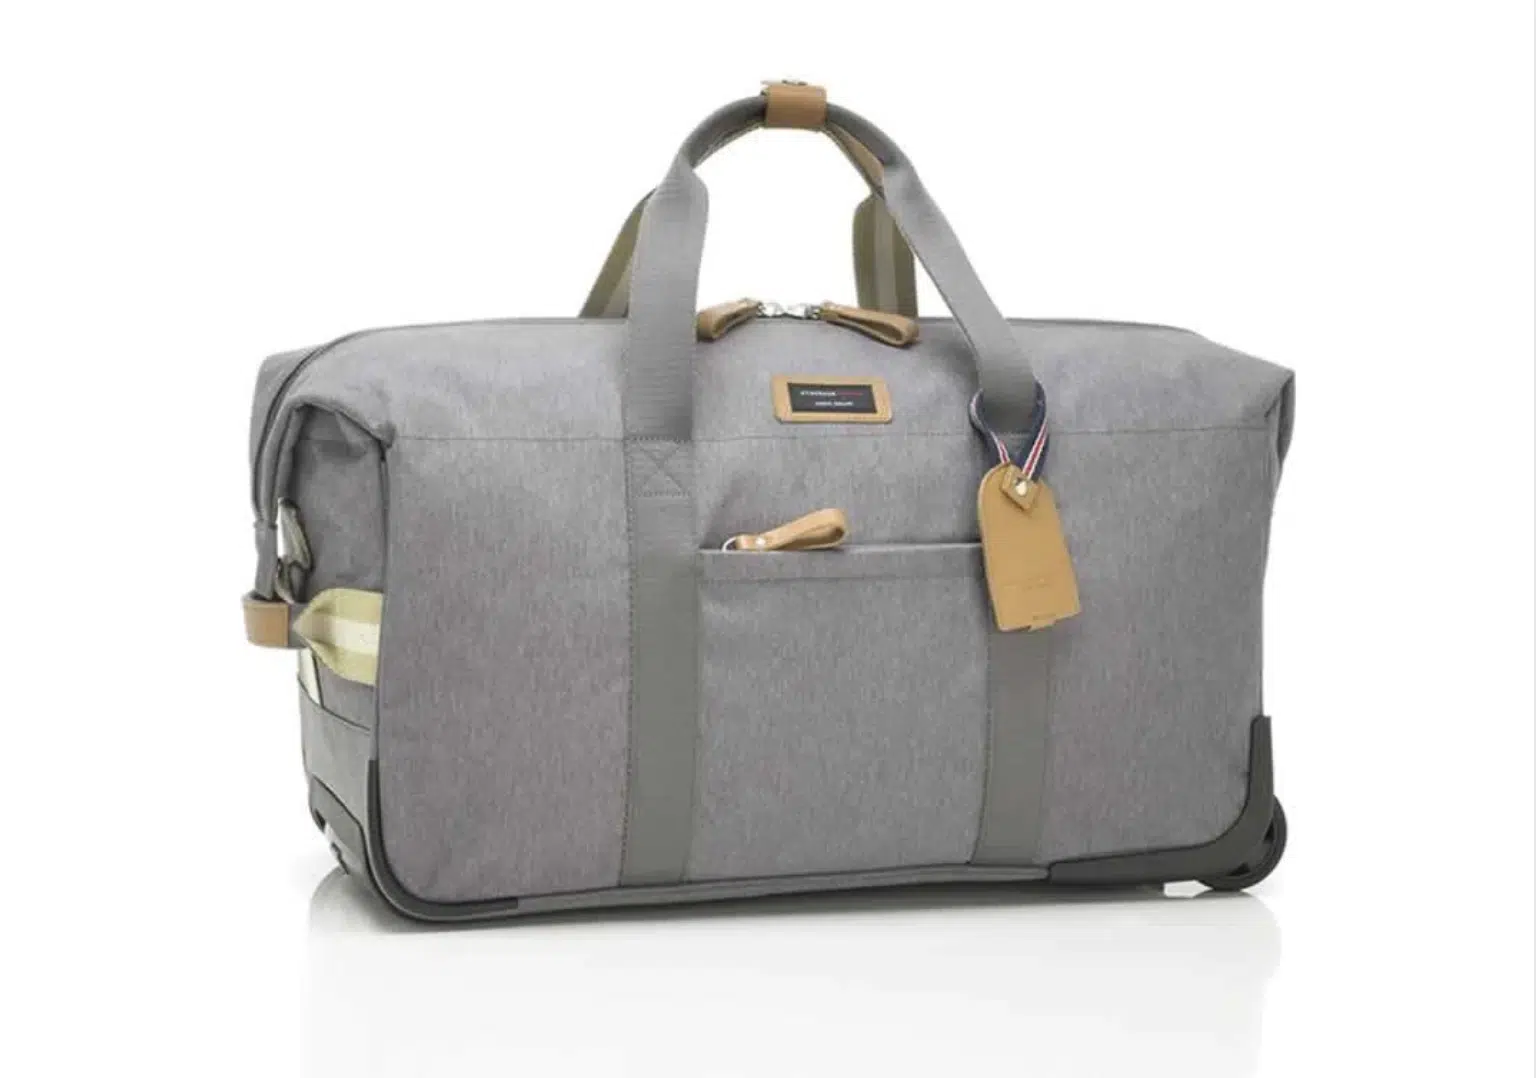 Storksak carry-on baby luggage